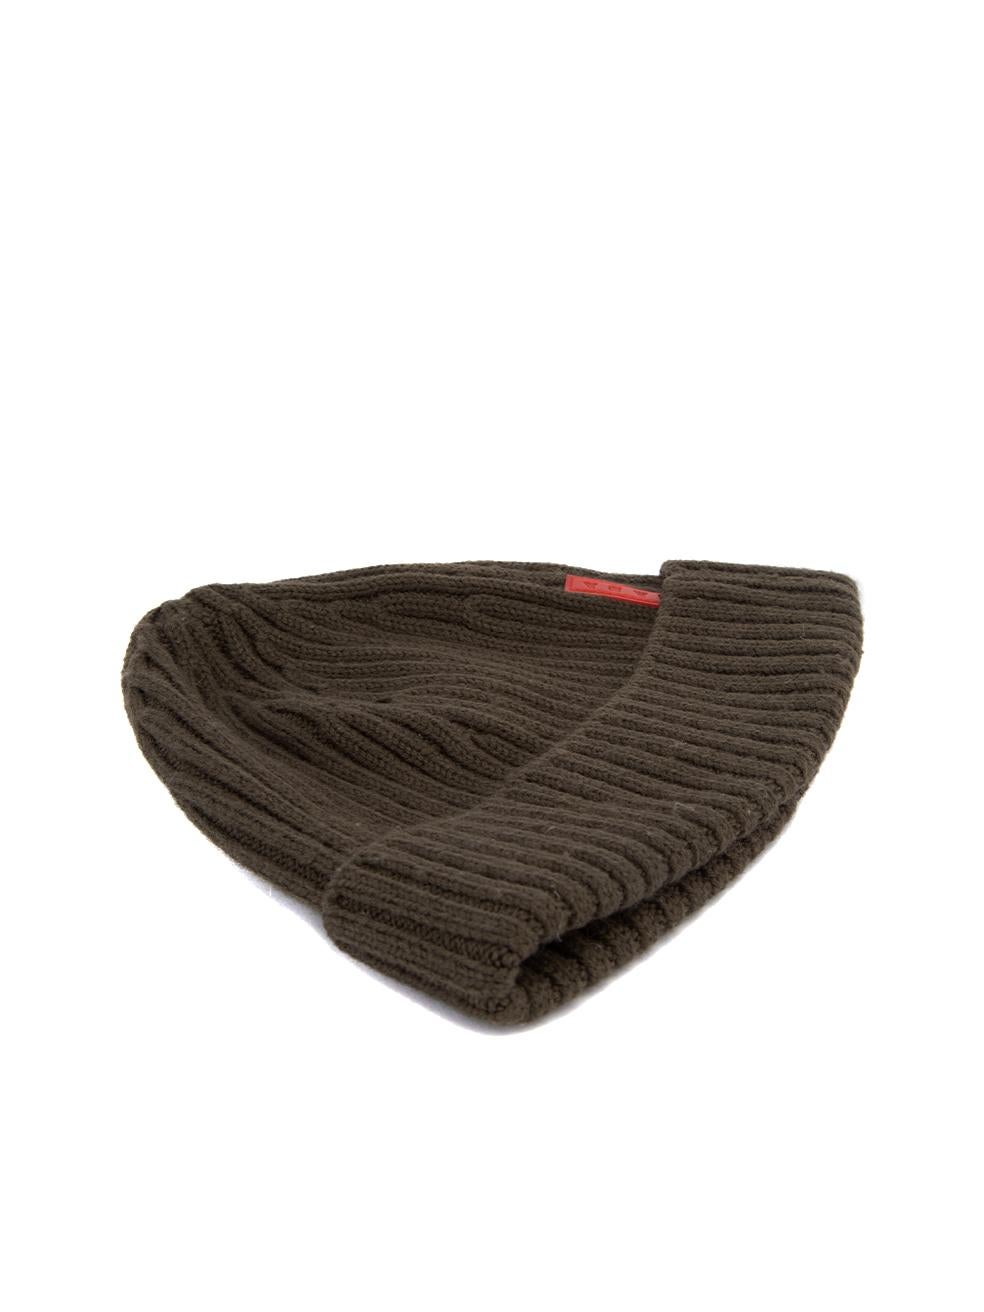 CONDITION is Very good. Hardly any visible wear to hat is evident on this used Prada designer resale item. Details Khaki Wool Ribbed knit beanie Red Prada logoon exterior Made in Italy Composition 100% Wool Care instructions: Professional dry clean